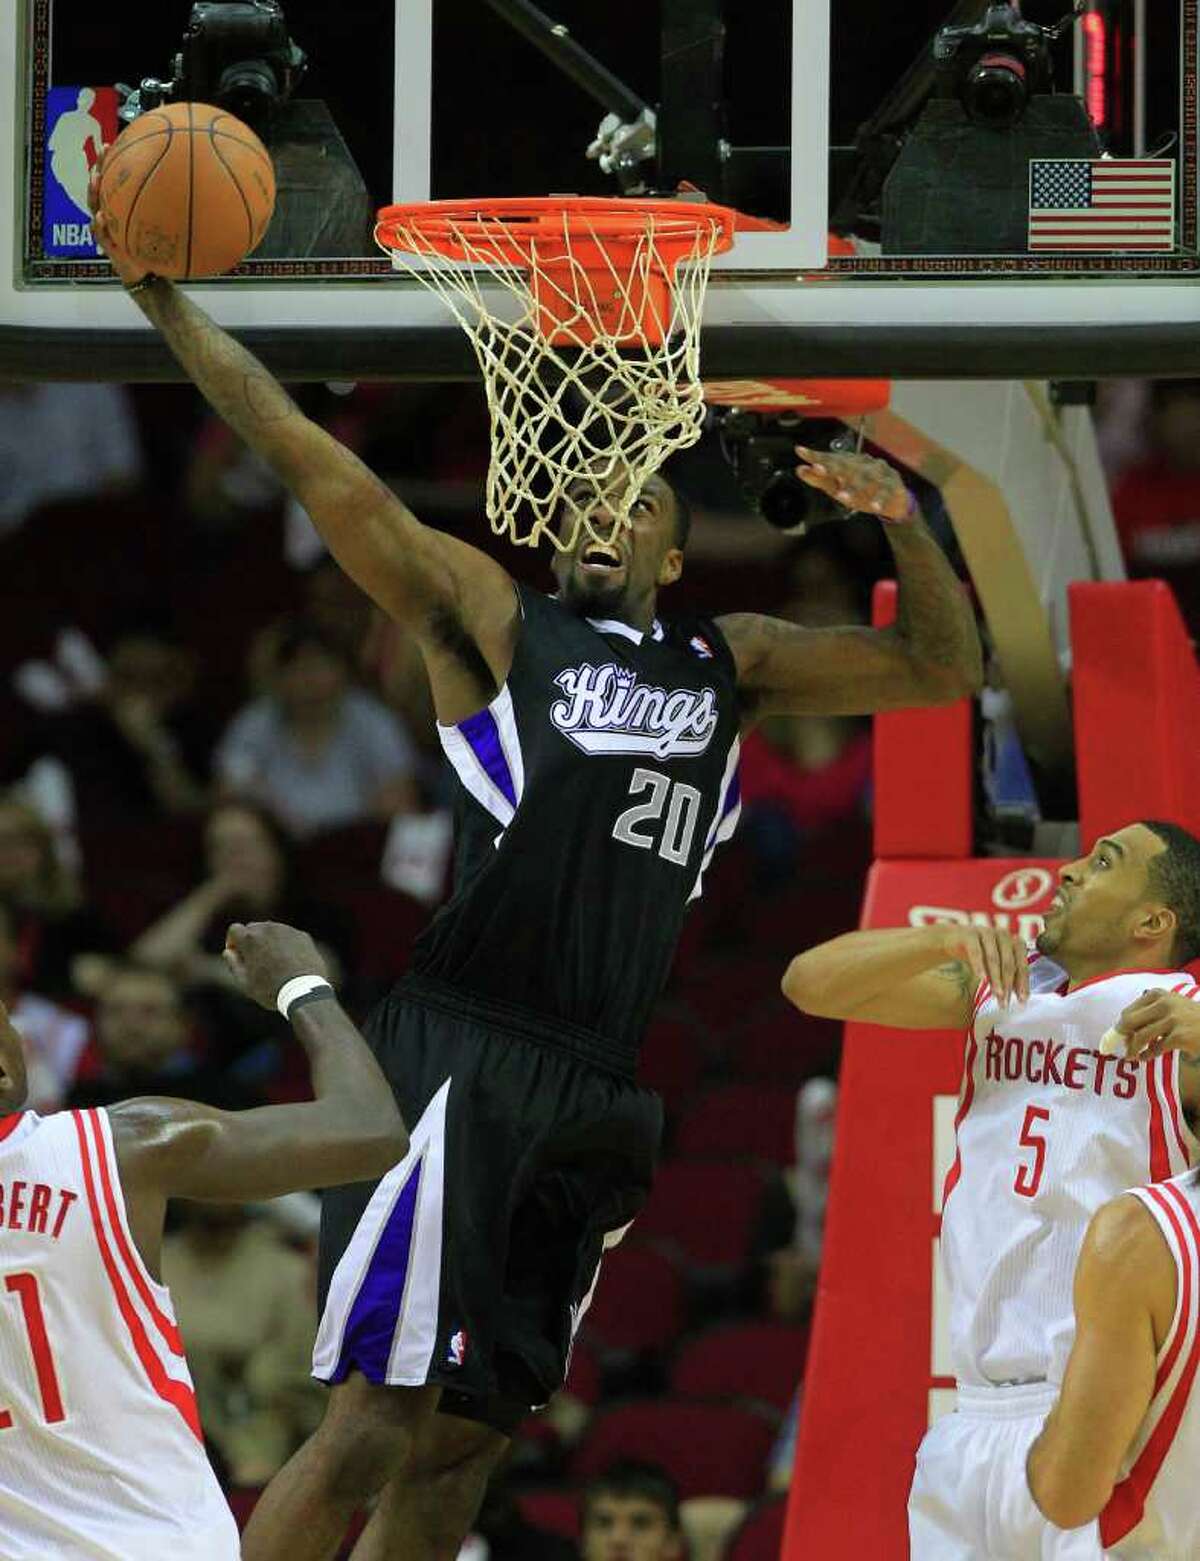 Sacramento Kings small forward Donte Greene (20) dunks the ball over Houston Rockets center Samuel Dalembert (21) and shooting guard Courtney Lee (5) during the first half of a basketball game at the Toyota Center Monday, March 26, 2012, in Houston.